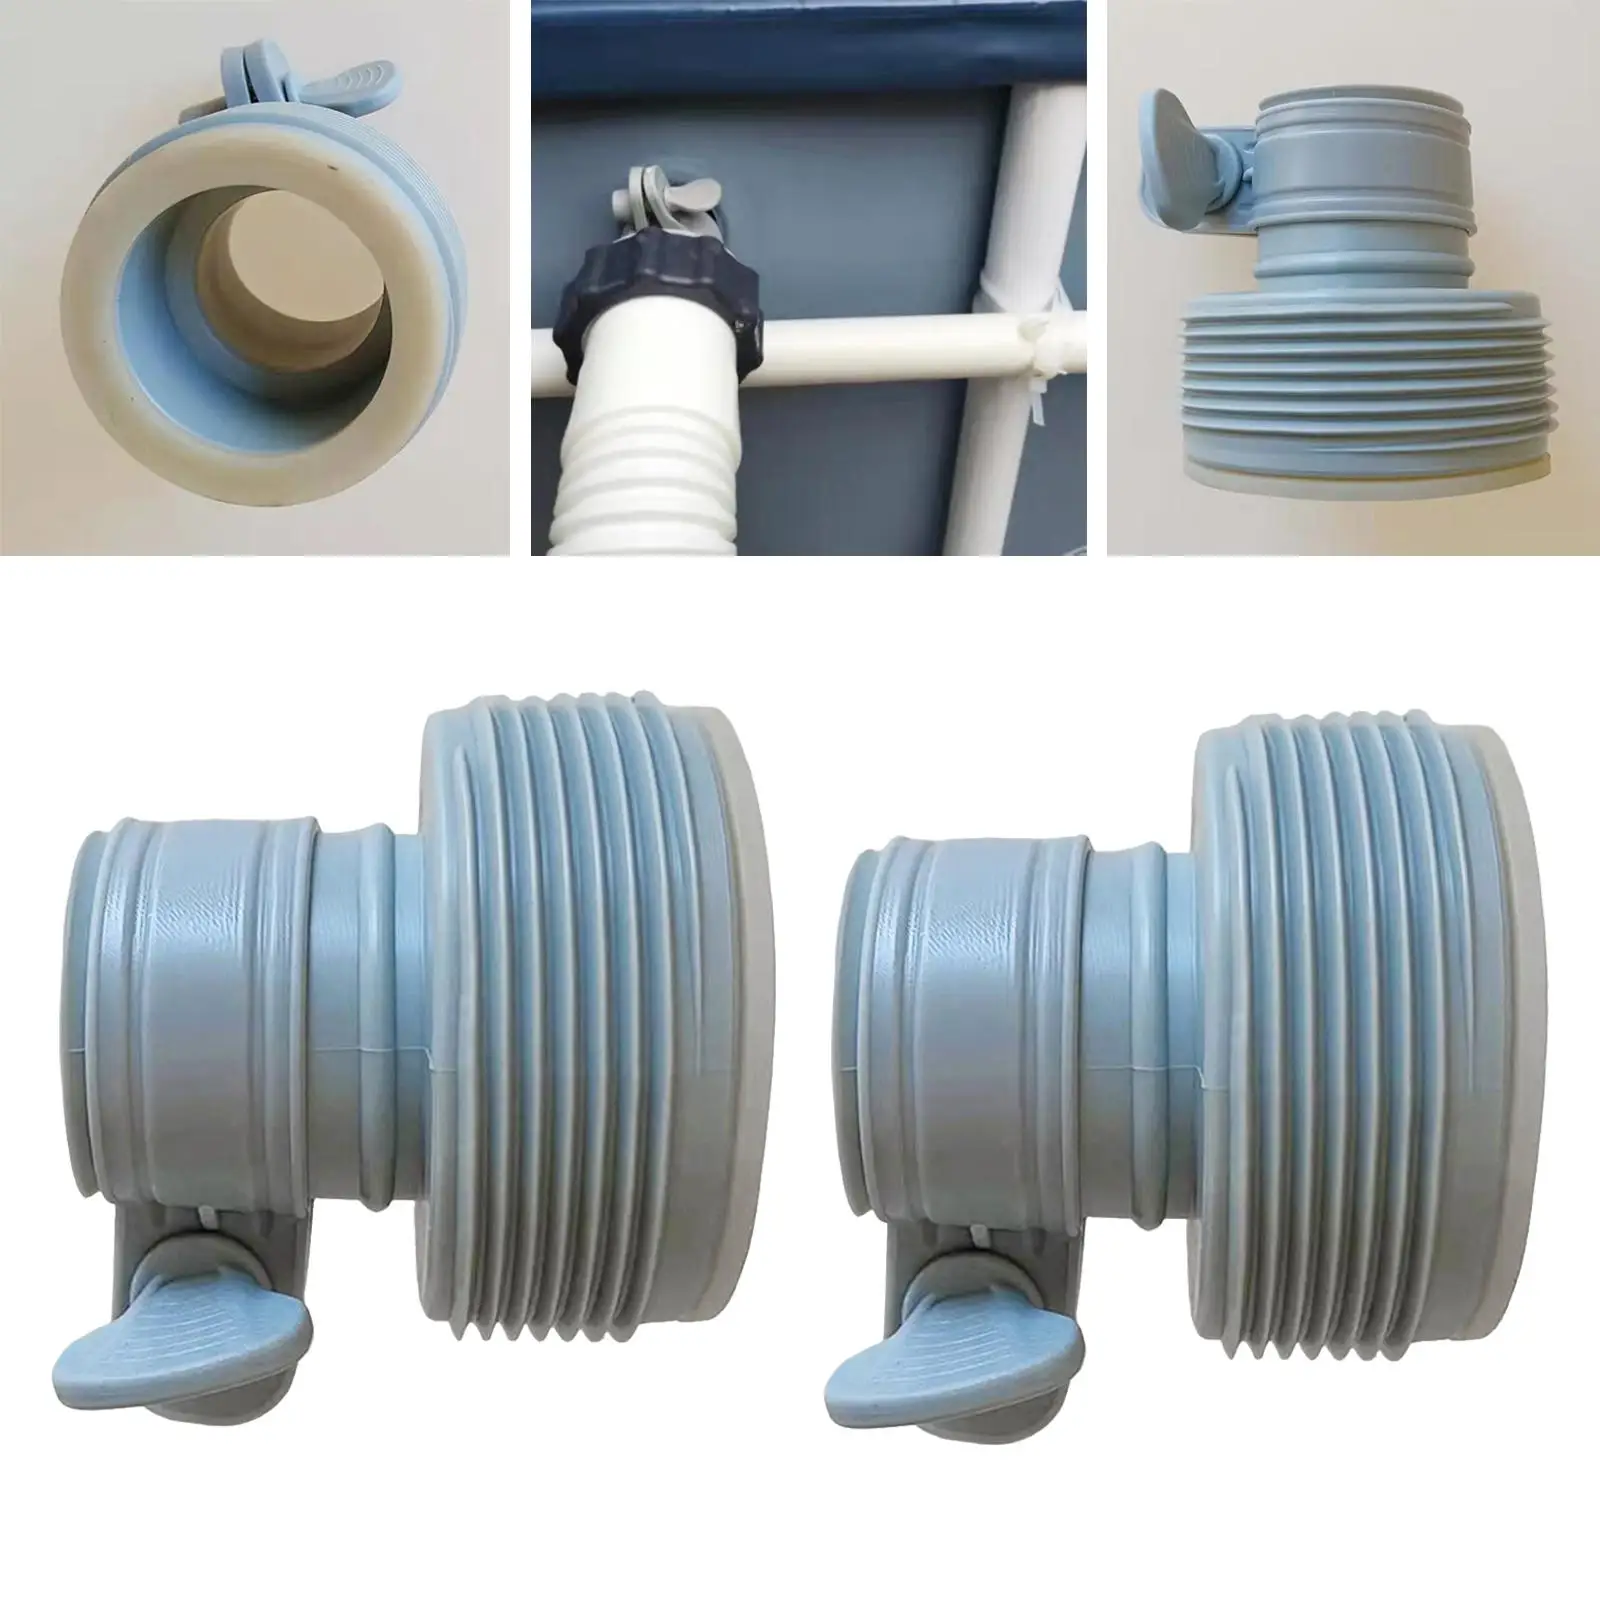 1.25Inch To 1.5Inch Type B Hose Adapters Hose Conversion Kit Adapter B For Pool Filter Pumps&Saltwater System